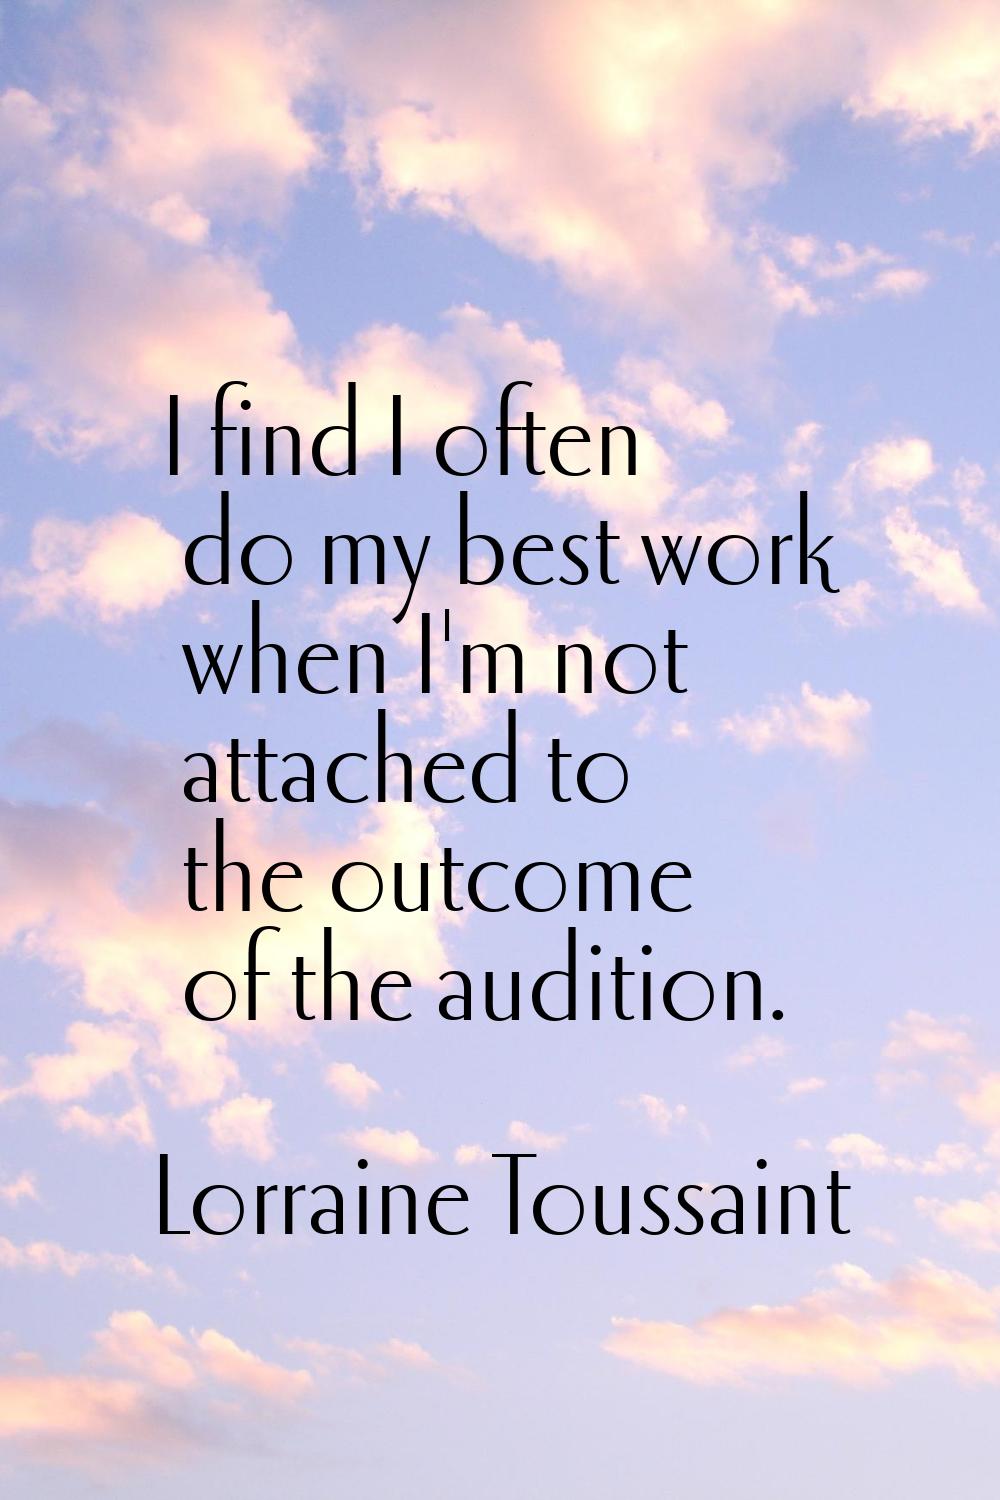 I find I often do my best work when I'm not attached to the outcome of the audition.